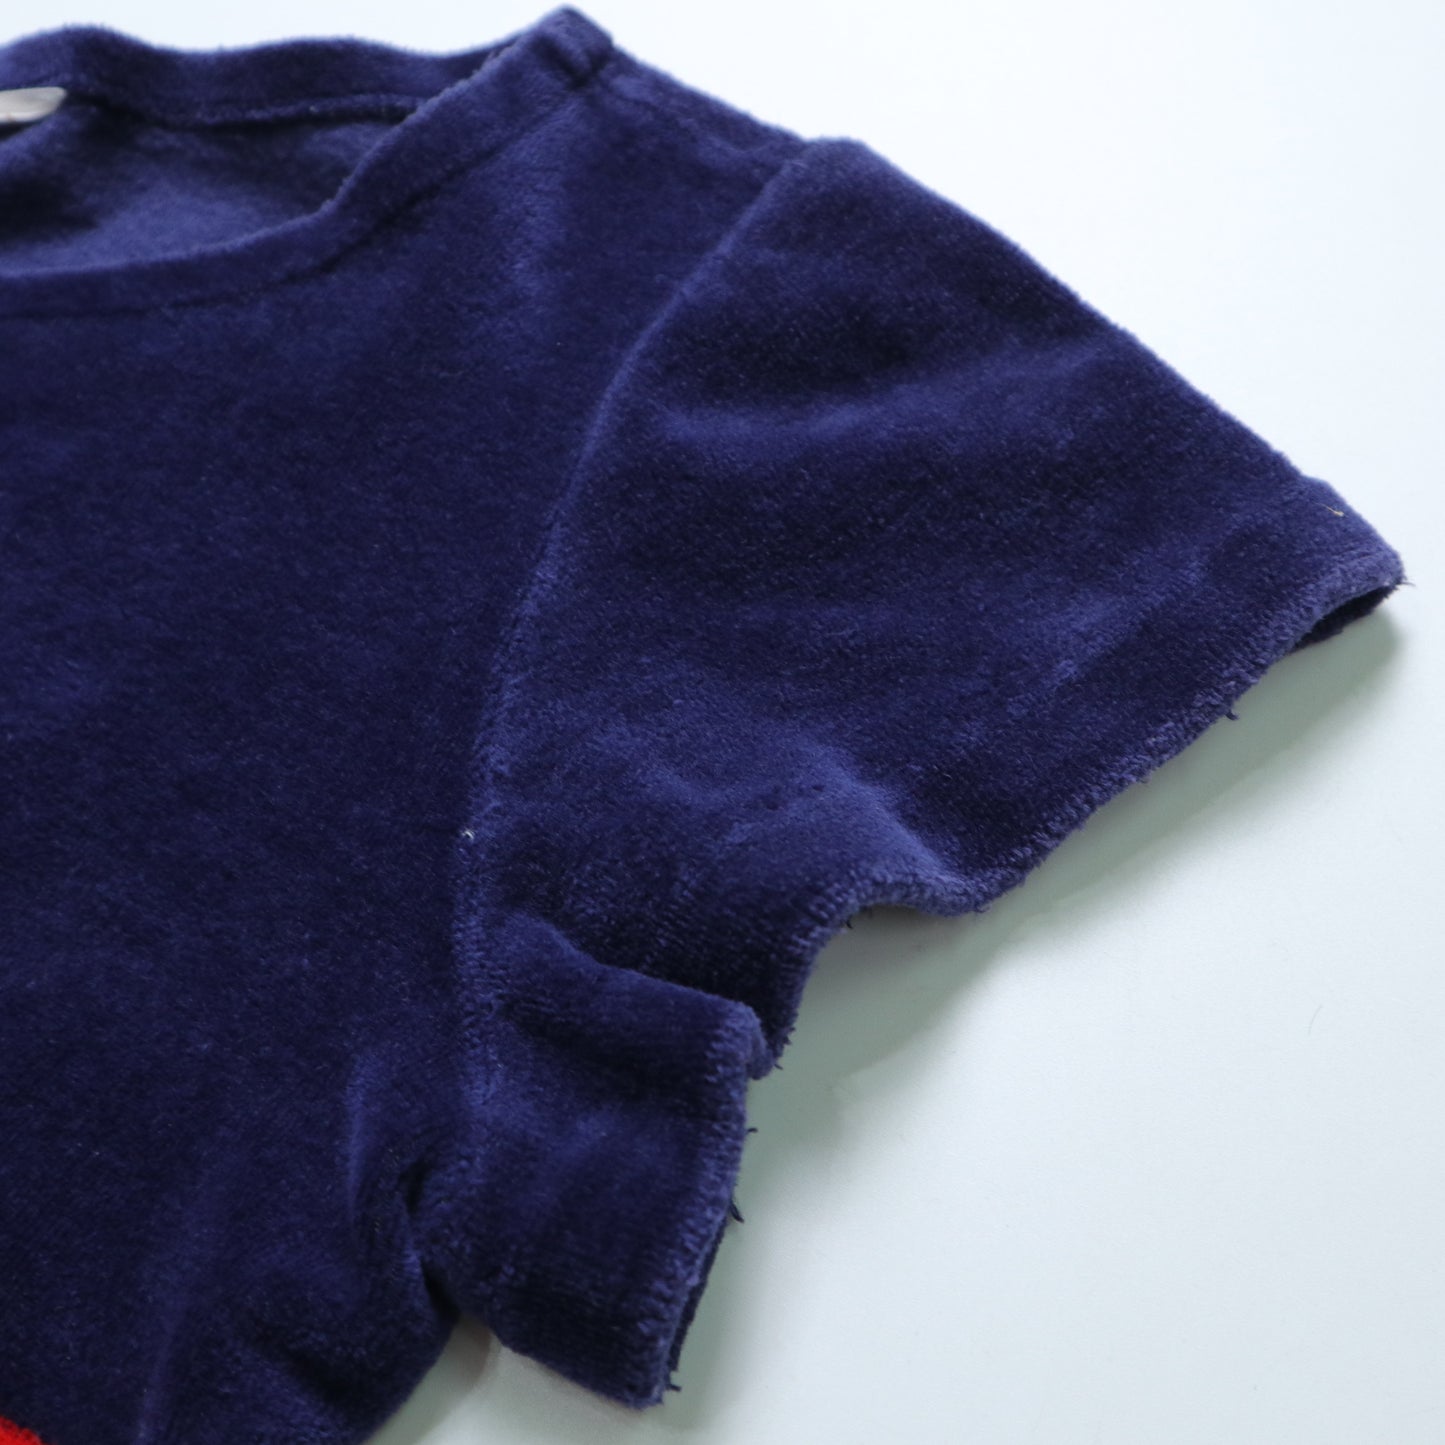 1970s JCPENNEY blue and red terry cloth top